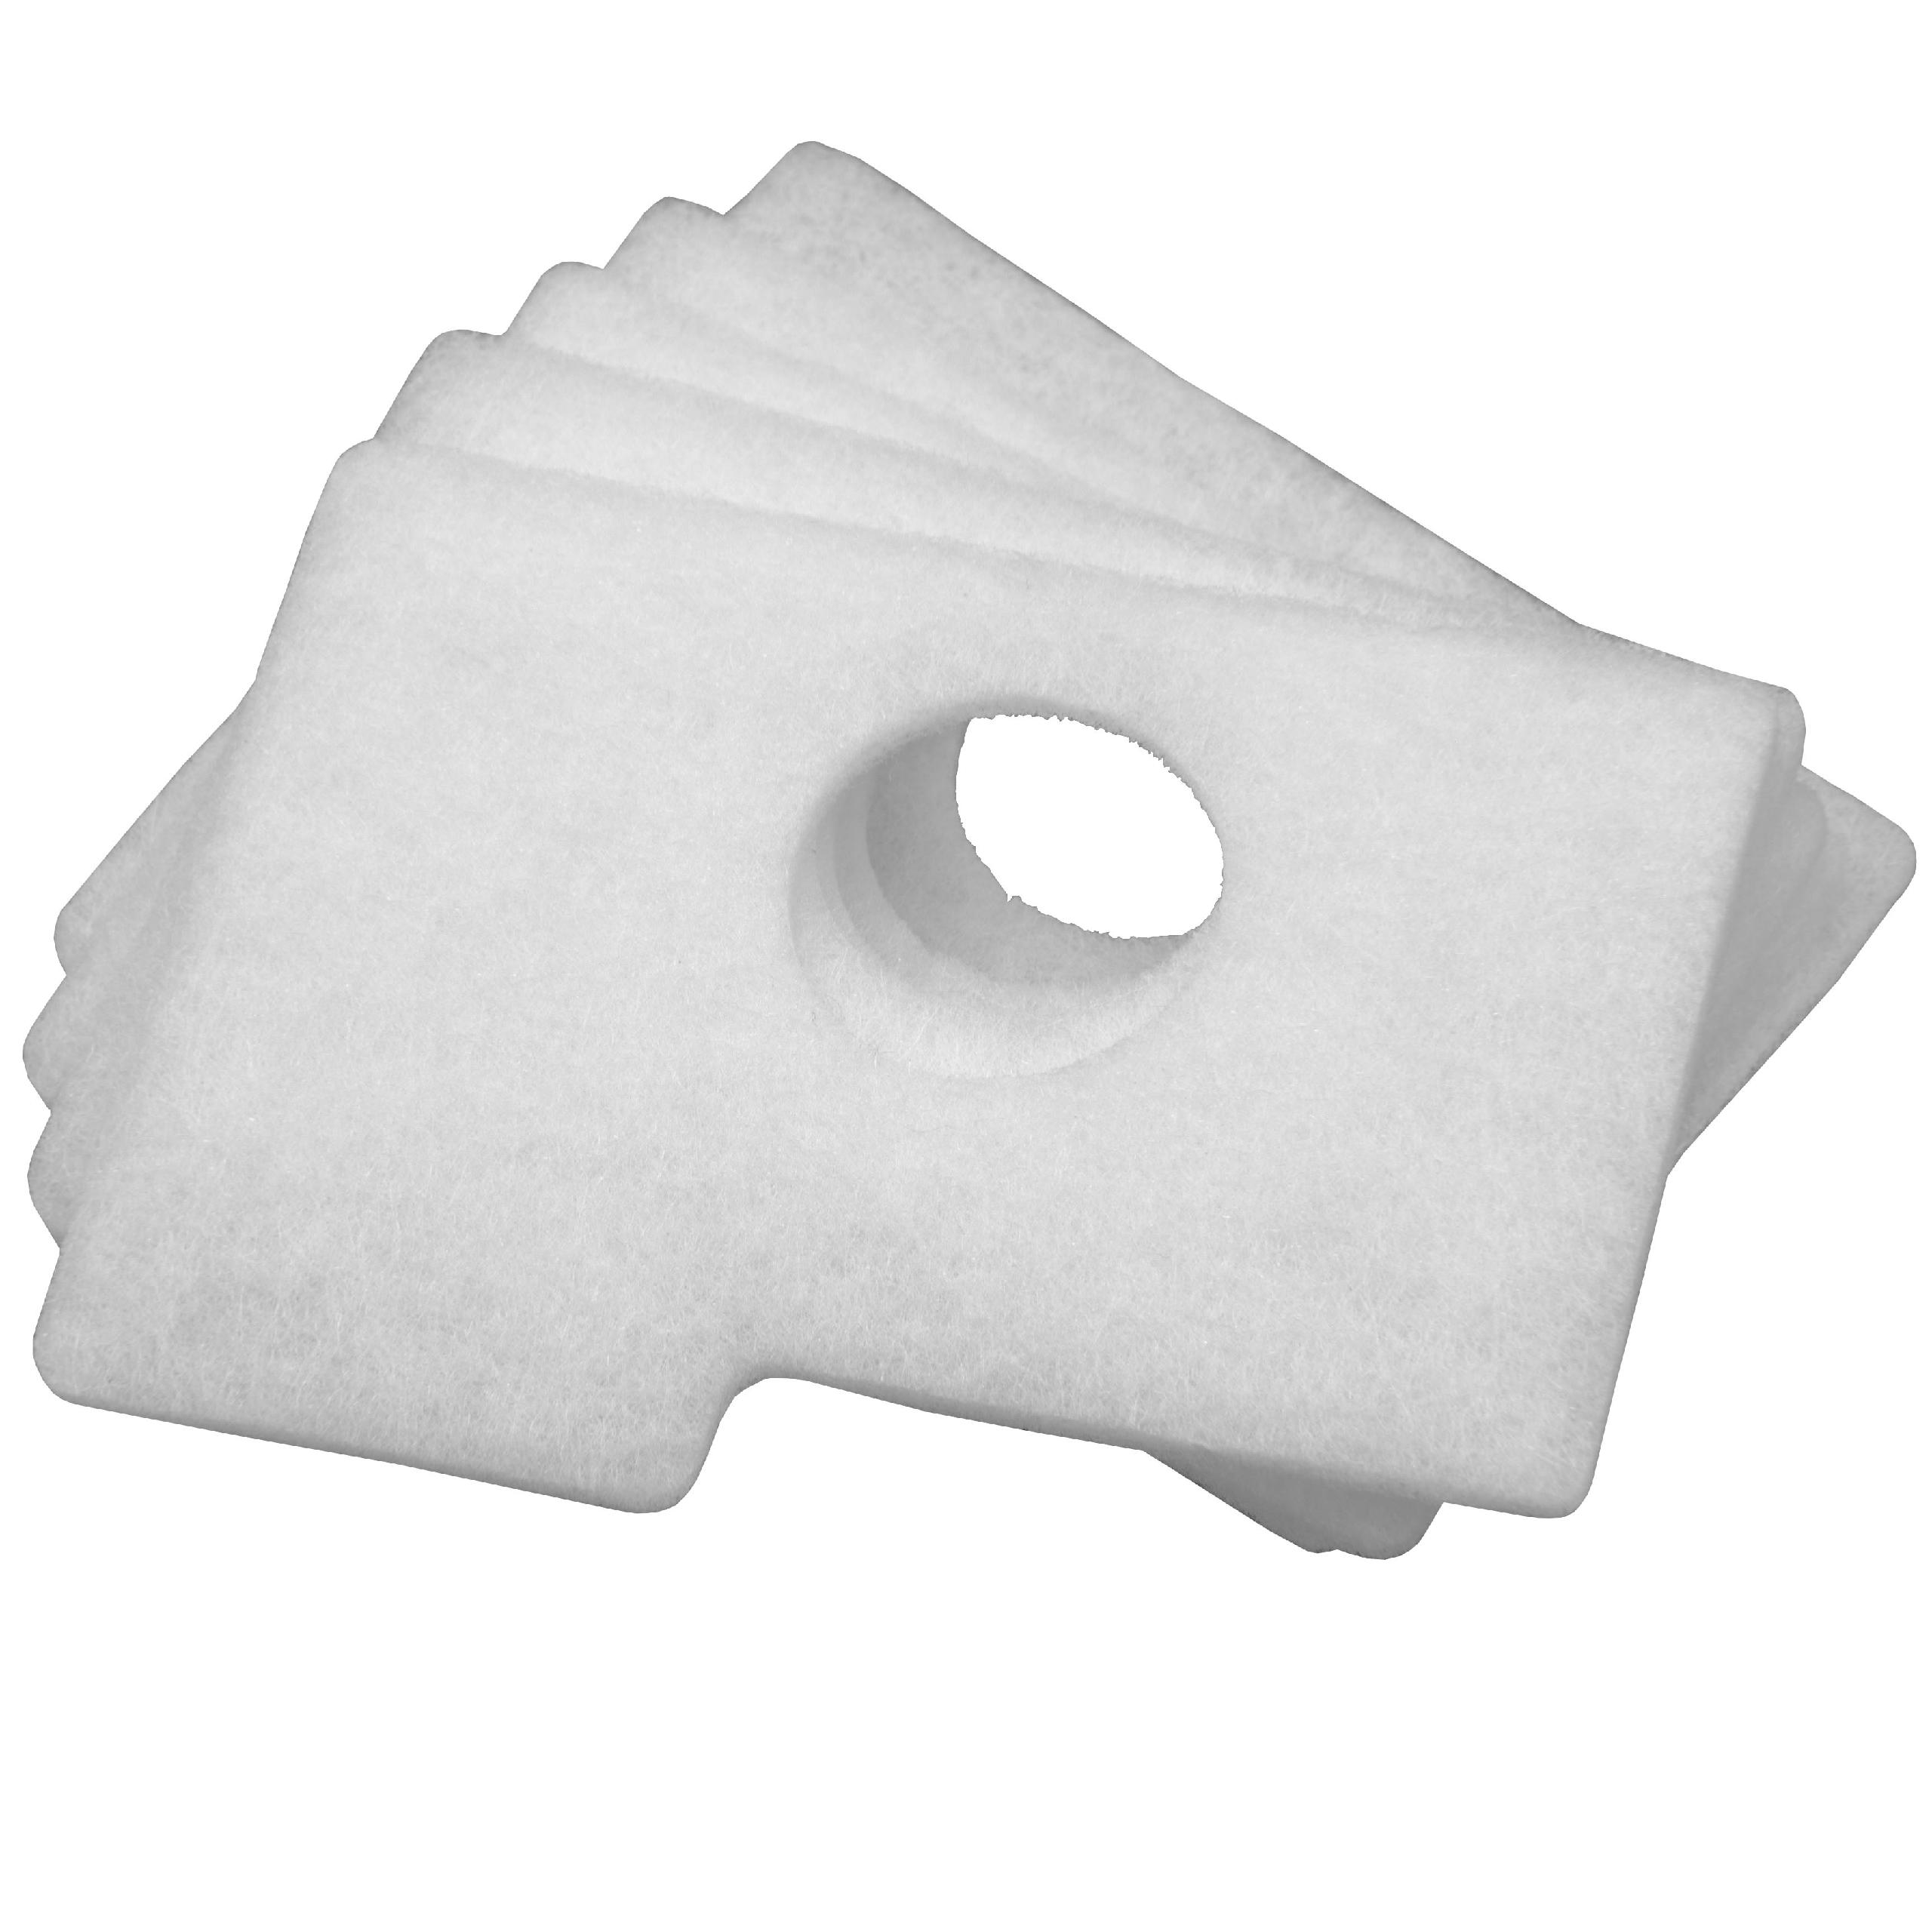 5x Filter replaces Stihl 1130 124 0800 for Power Saw - air filter